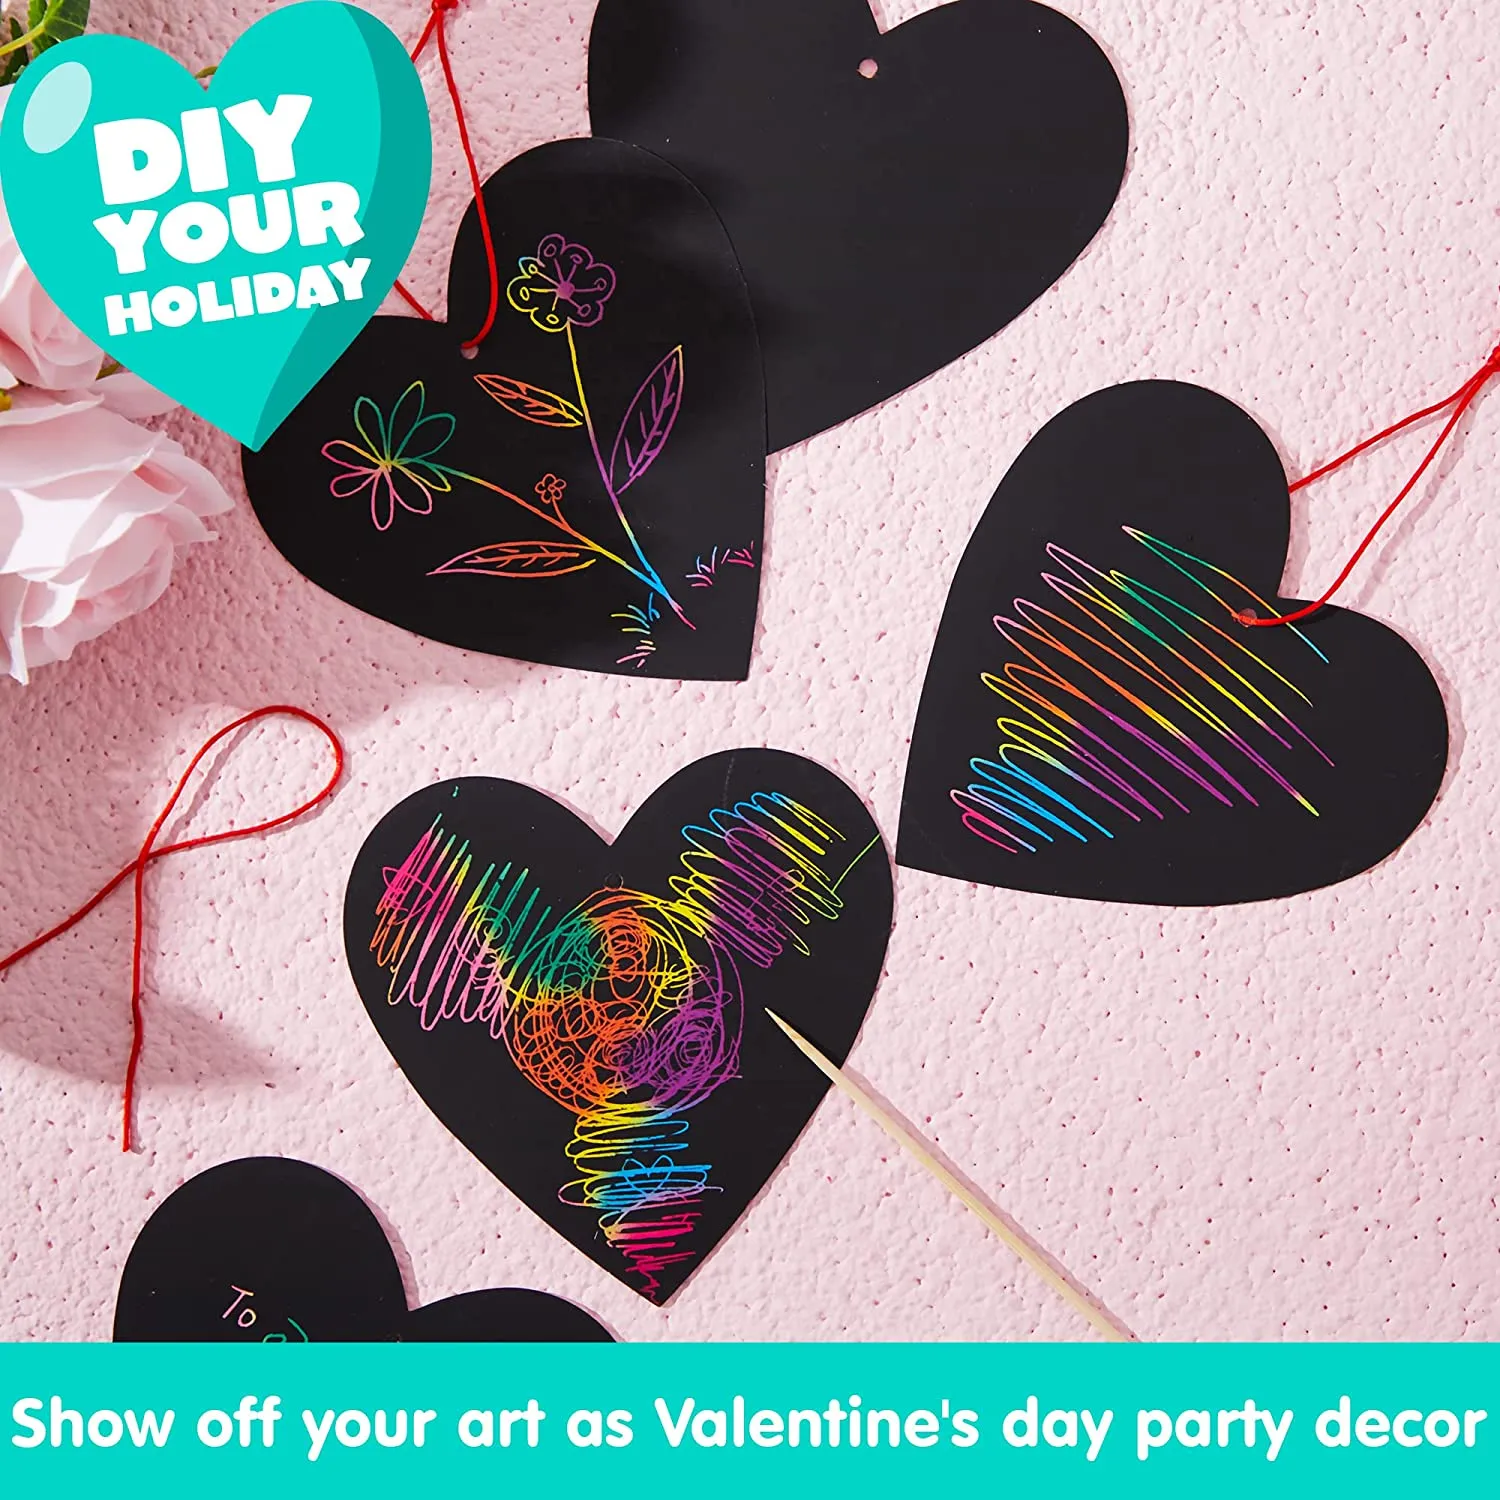 Valentine's Day Gifts, Cards, & Decor